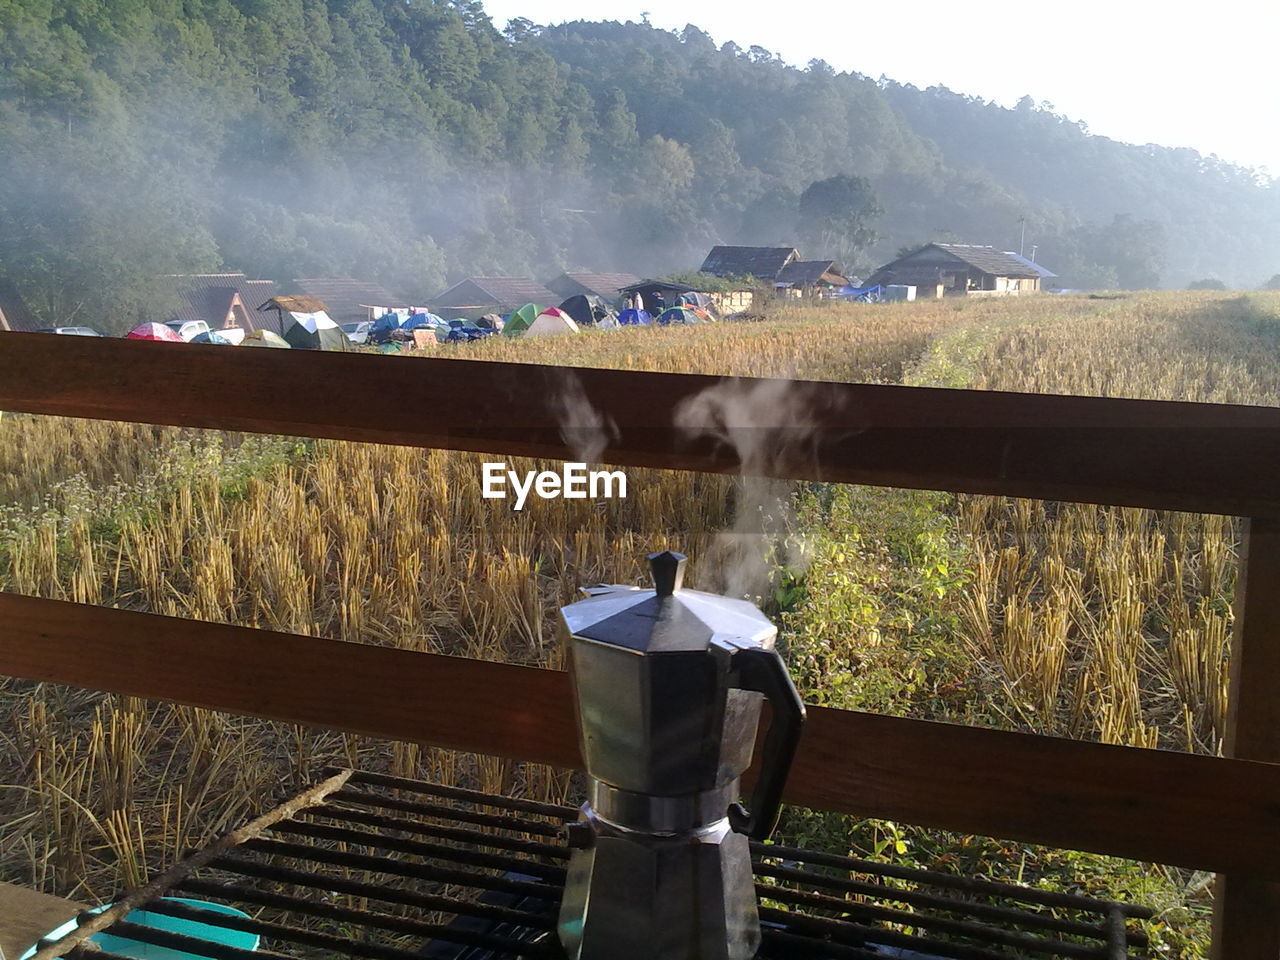 Hot coffee maker on metal grate by grassy field